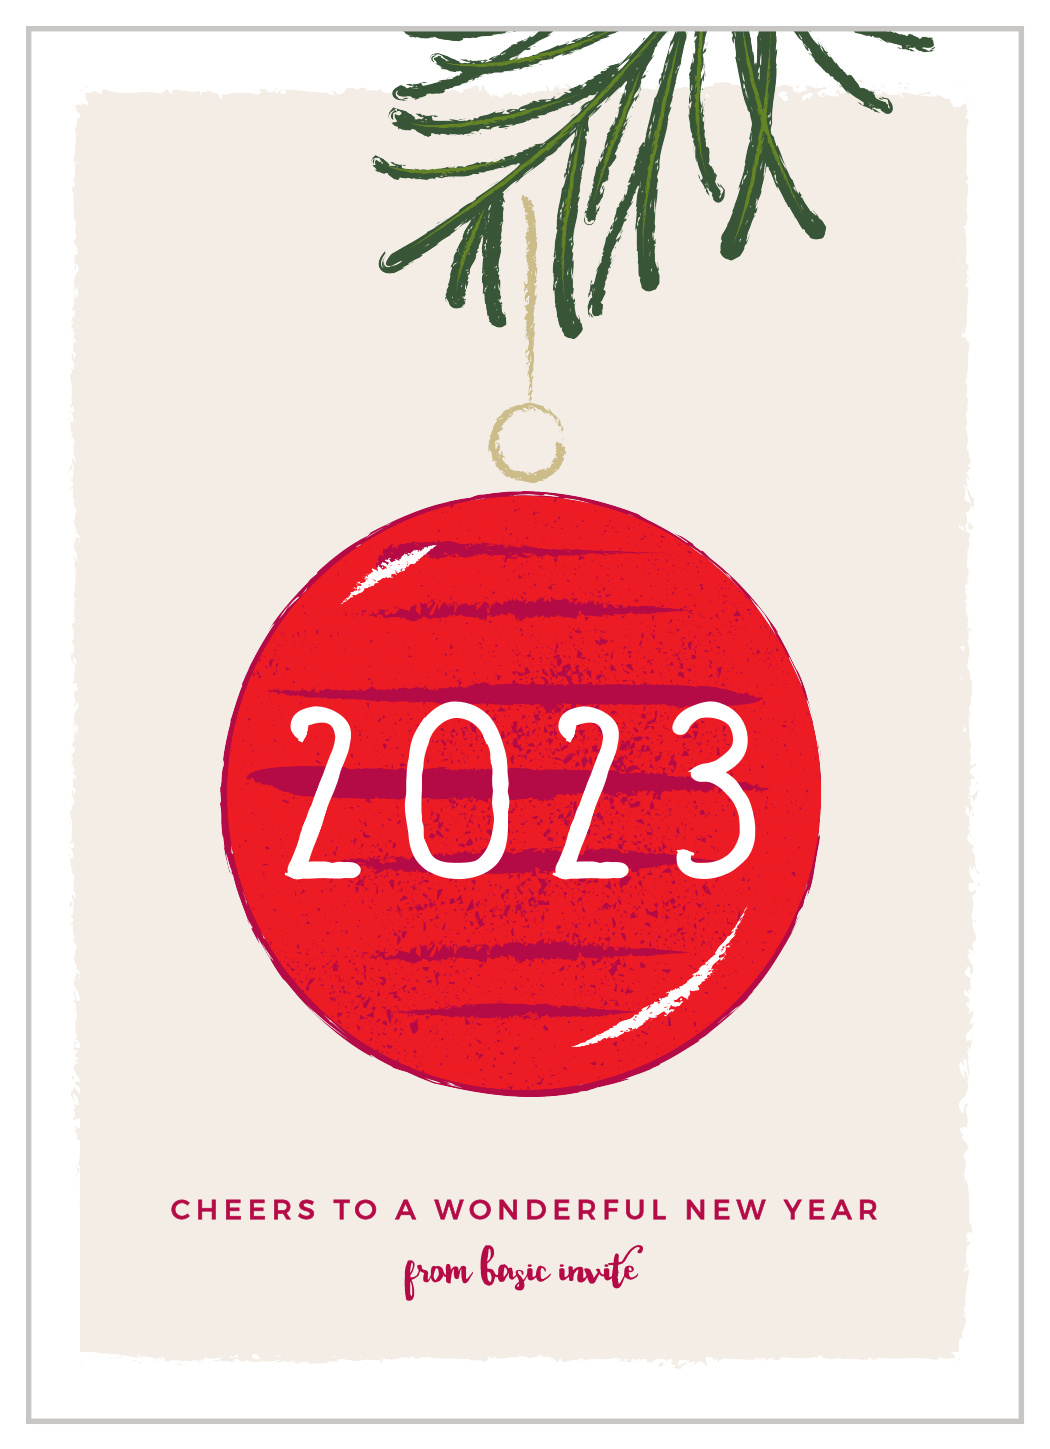 New Year Ornament Corporate Holiday Cards